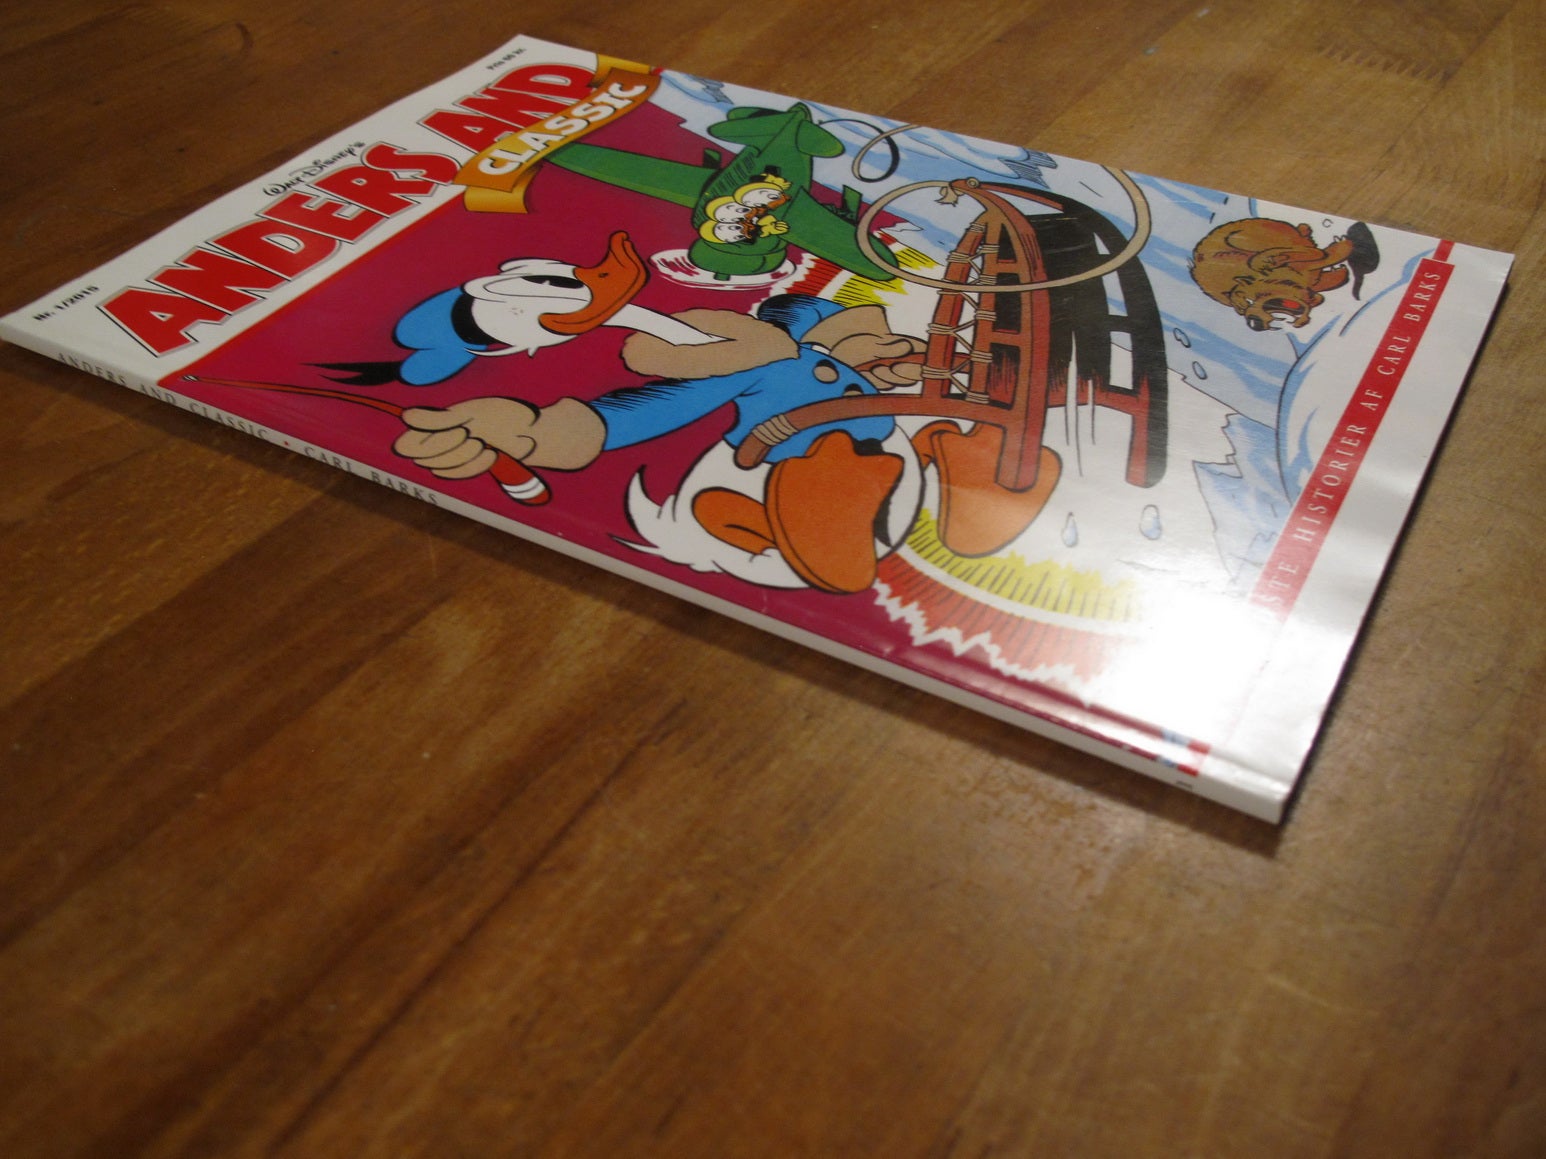 Anders And Classic nr. 1 / 2015 (m. indlæg), Carl Barks,